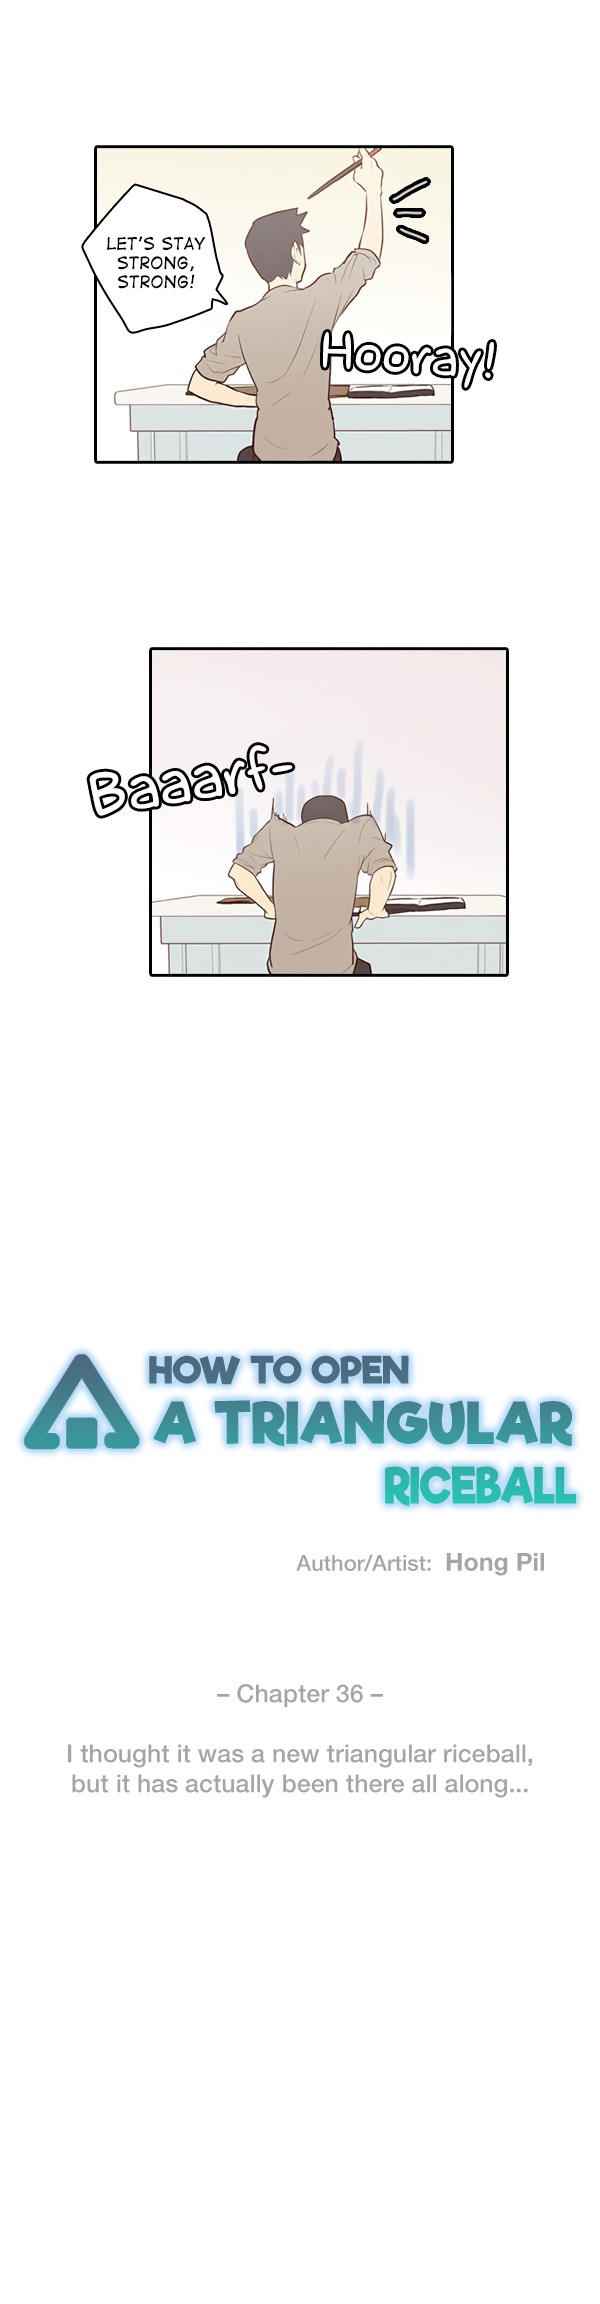 How to Open a Triangular Riceball - Chapter 36 Page 8